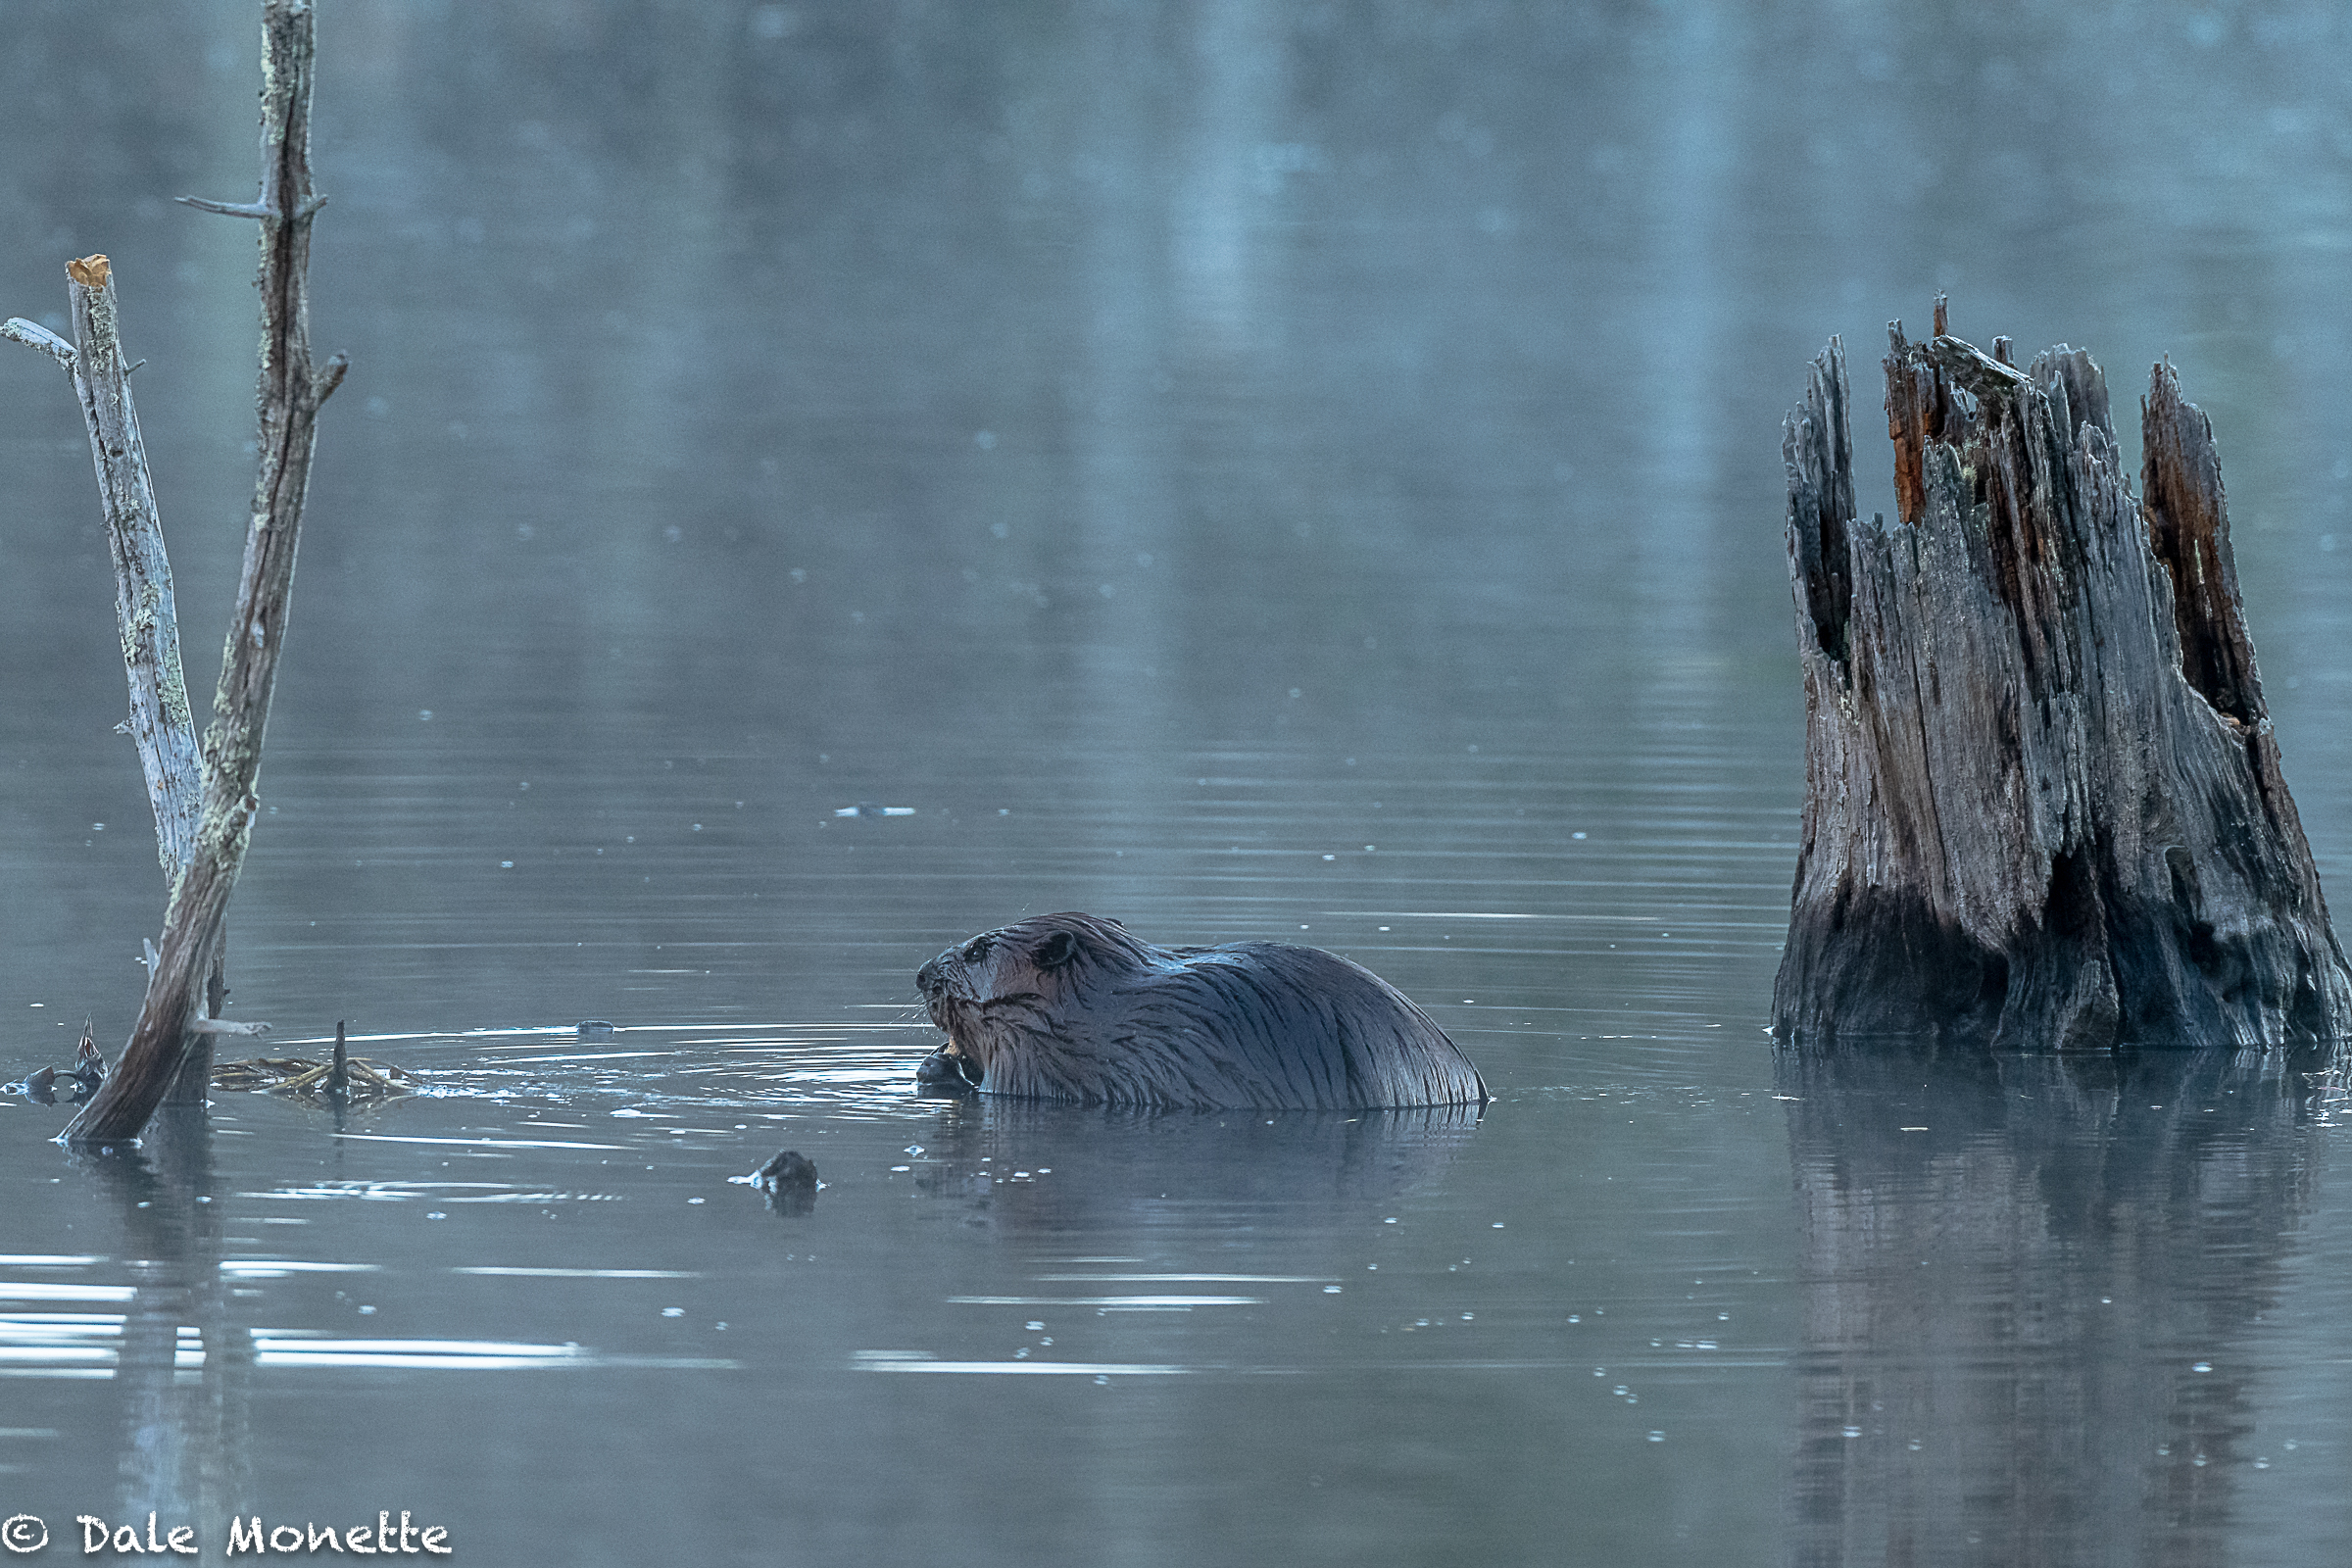   I caught the last meal before retiring to the lodge for the day of this young beaver. He had a big bunch of tubers he dug up from the bottom and he never knew I was behind him watching. Simple stuff like this makes it worth getting wet for on rainy